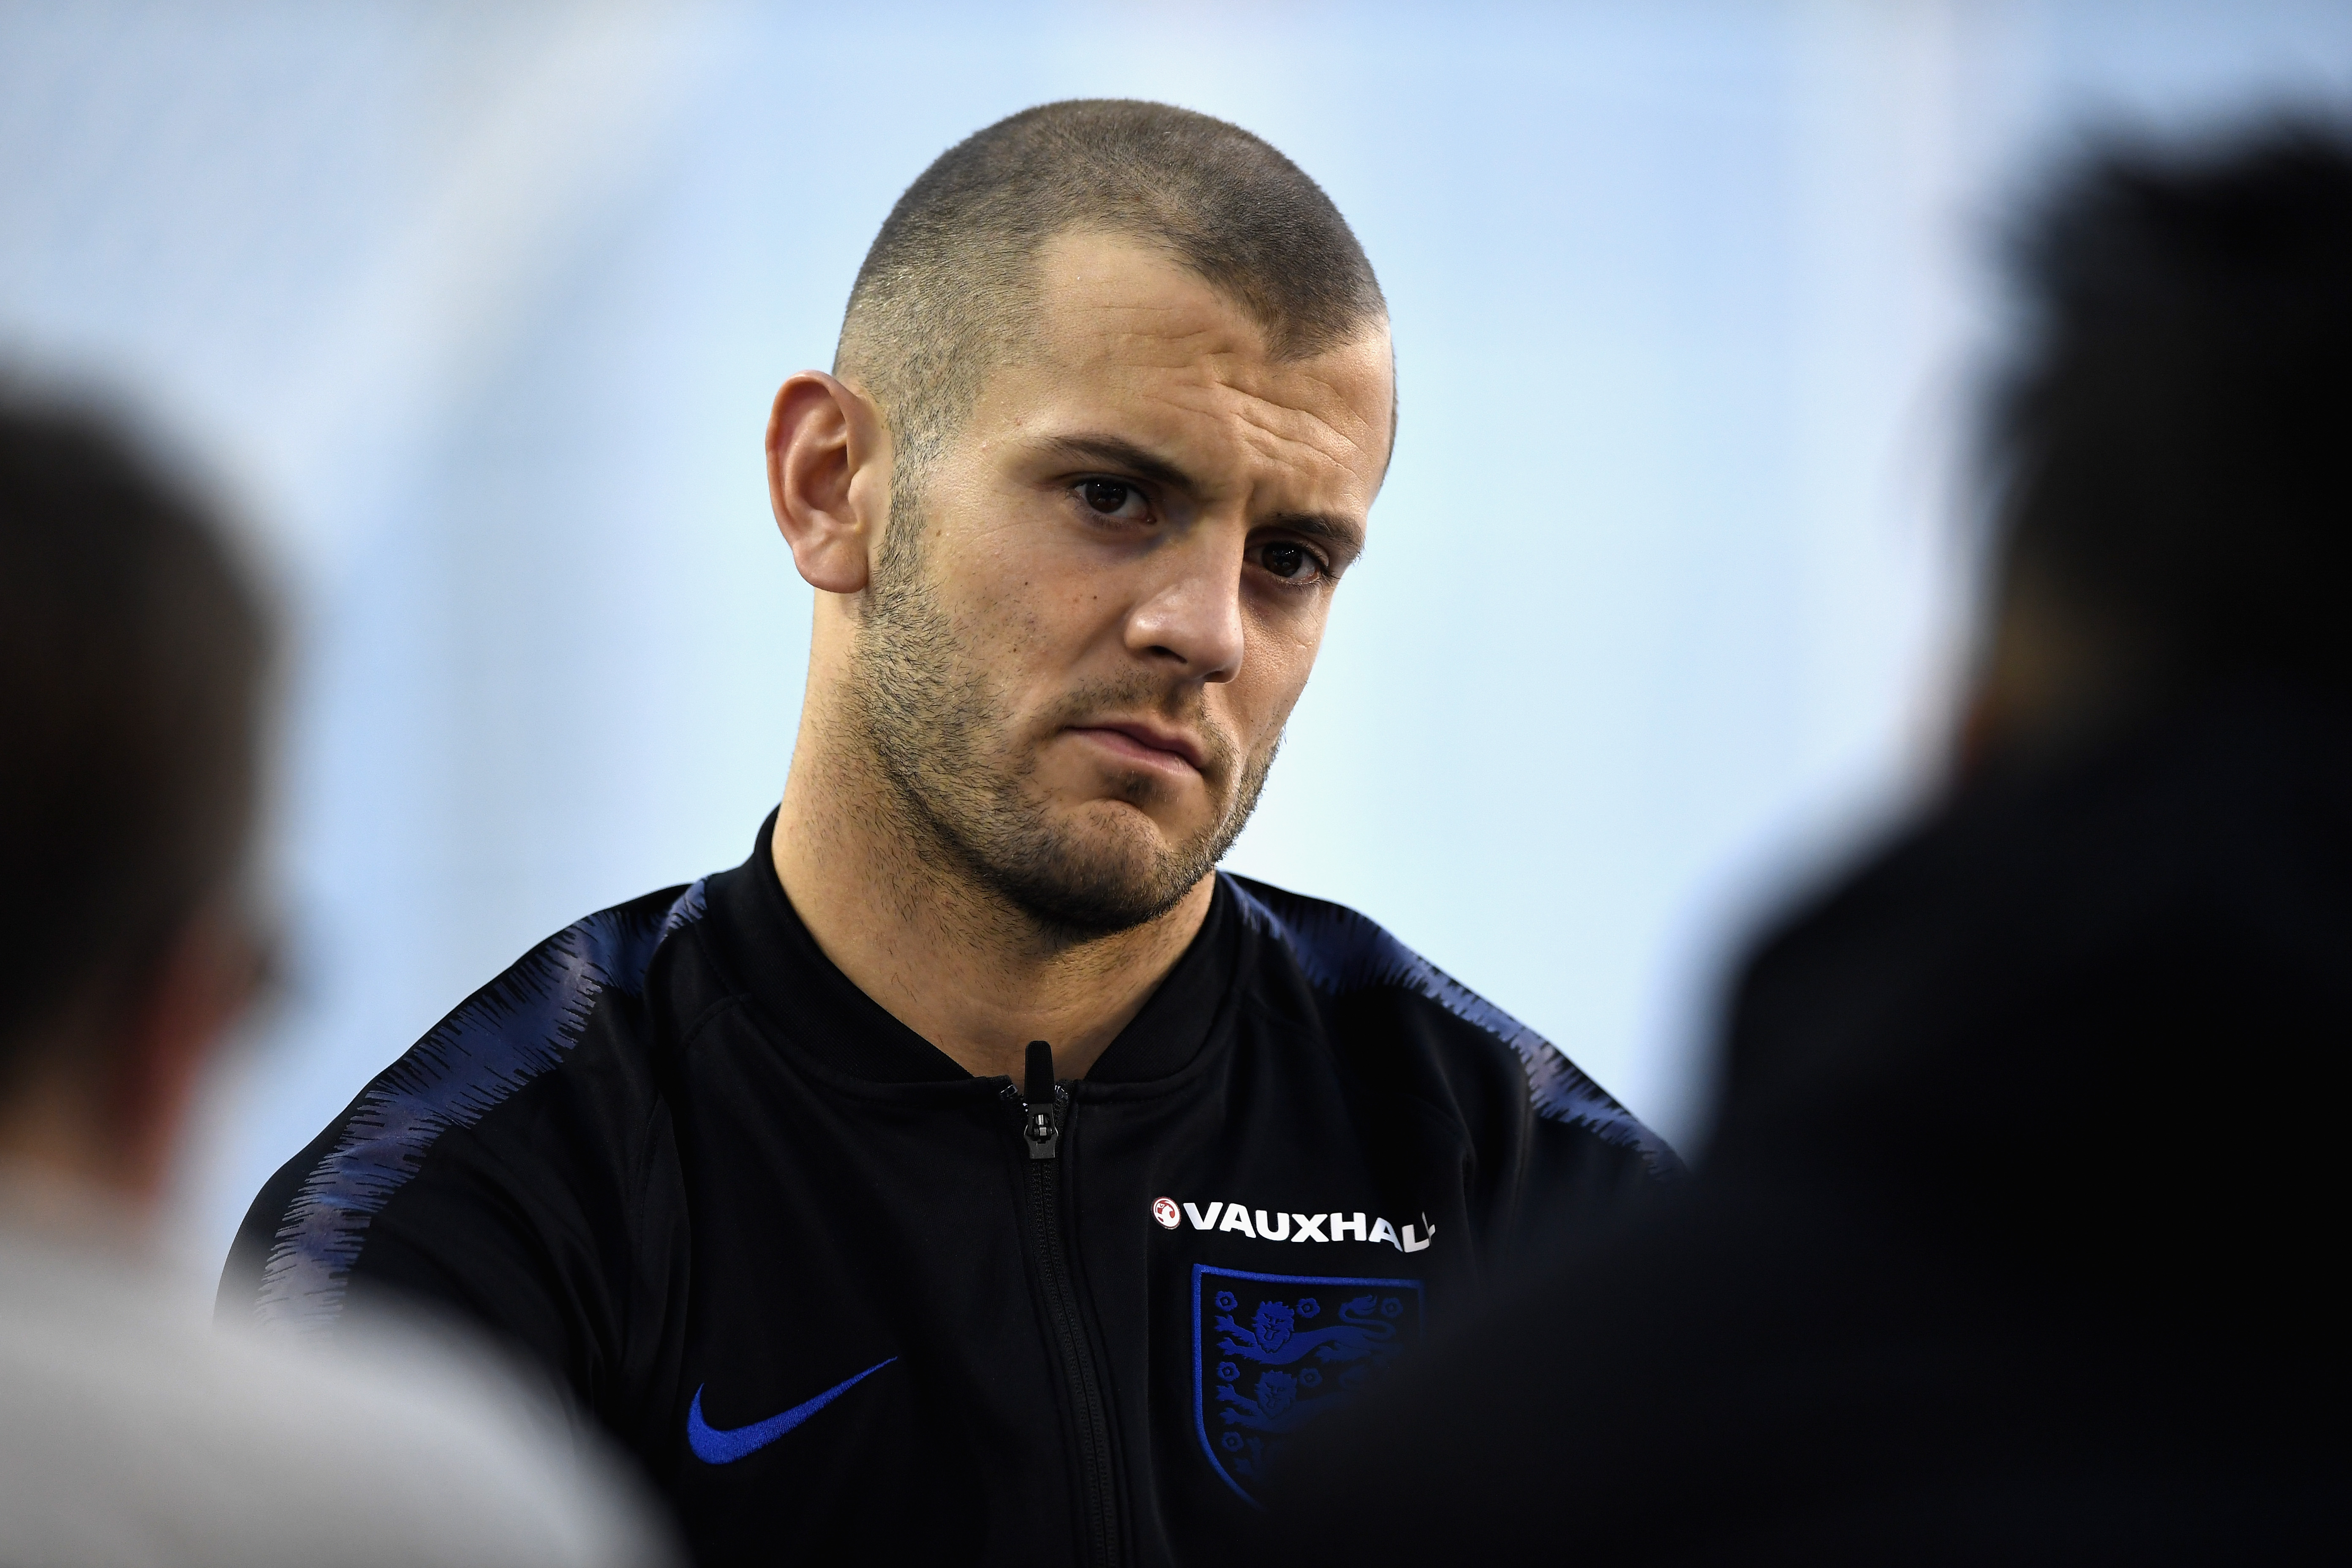 BURTON-UPON-TRENT, ENGLAND - MARCH 20:  Jack Wilshere speaks during an England press conference session at St Georges Park on March 20, 2018 in Burton-upon-Trent, England.  (Photo by Gareth Copley/Getty Images)